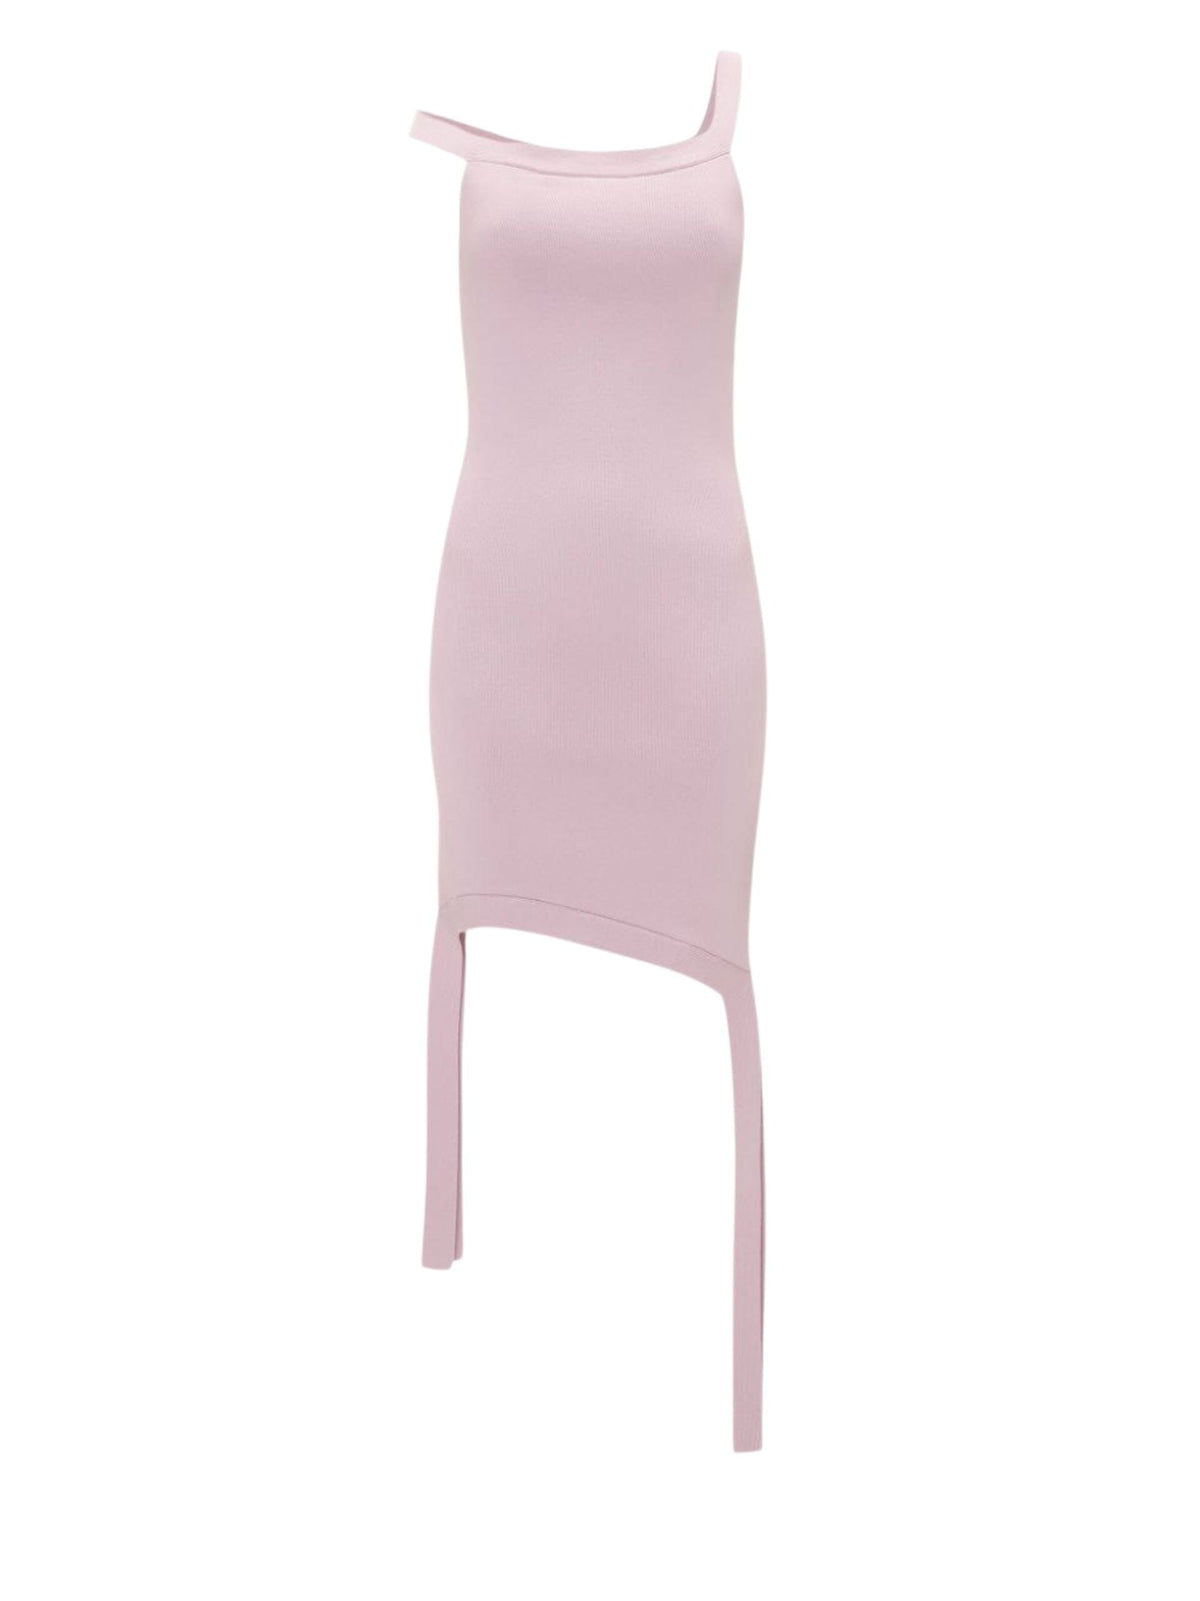 Deconstructed Dress / Lilac Womens JW Anderson 